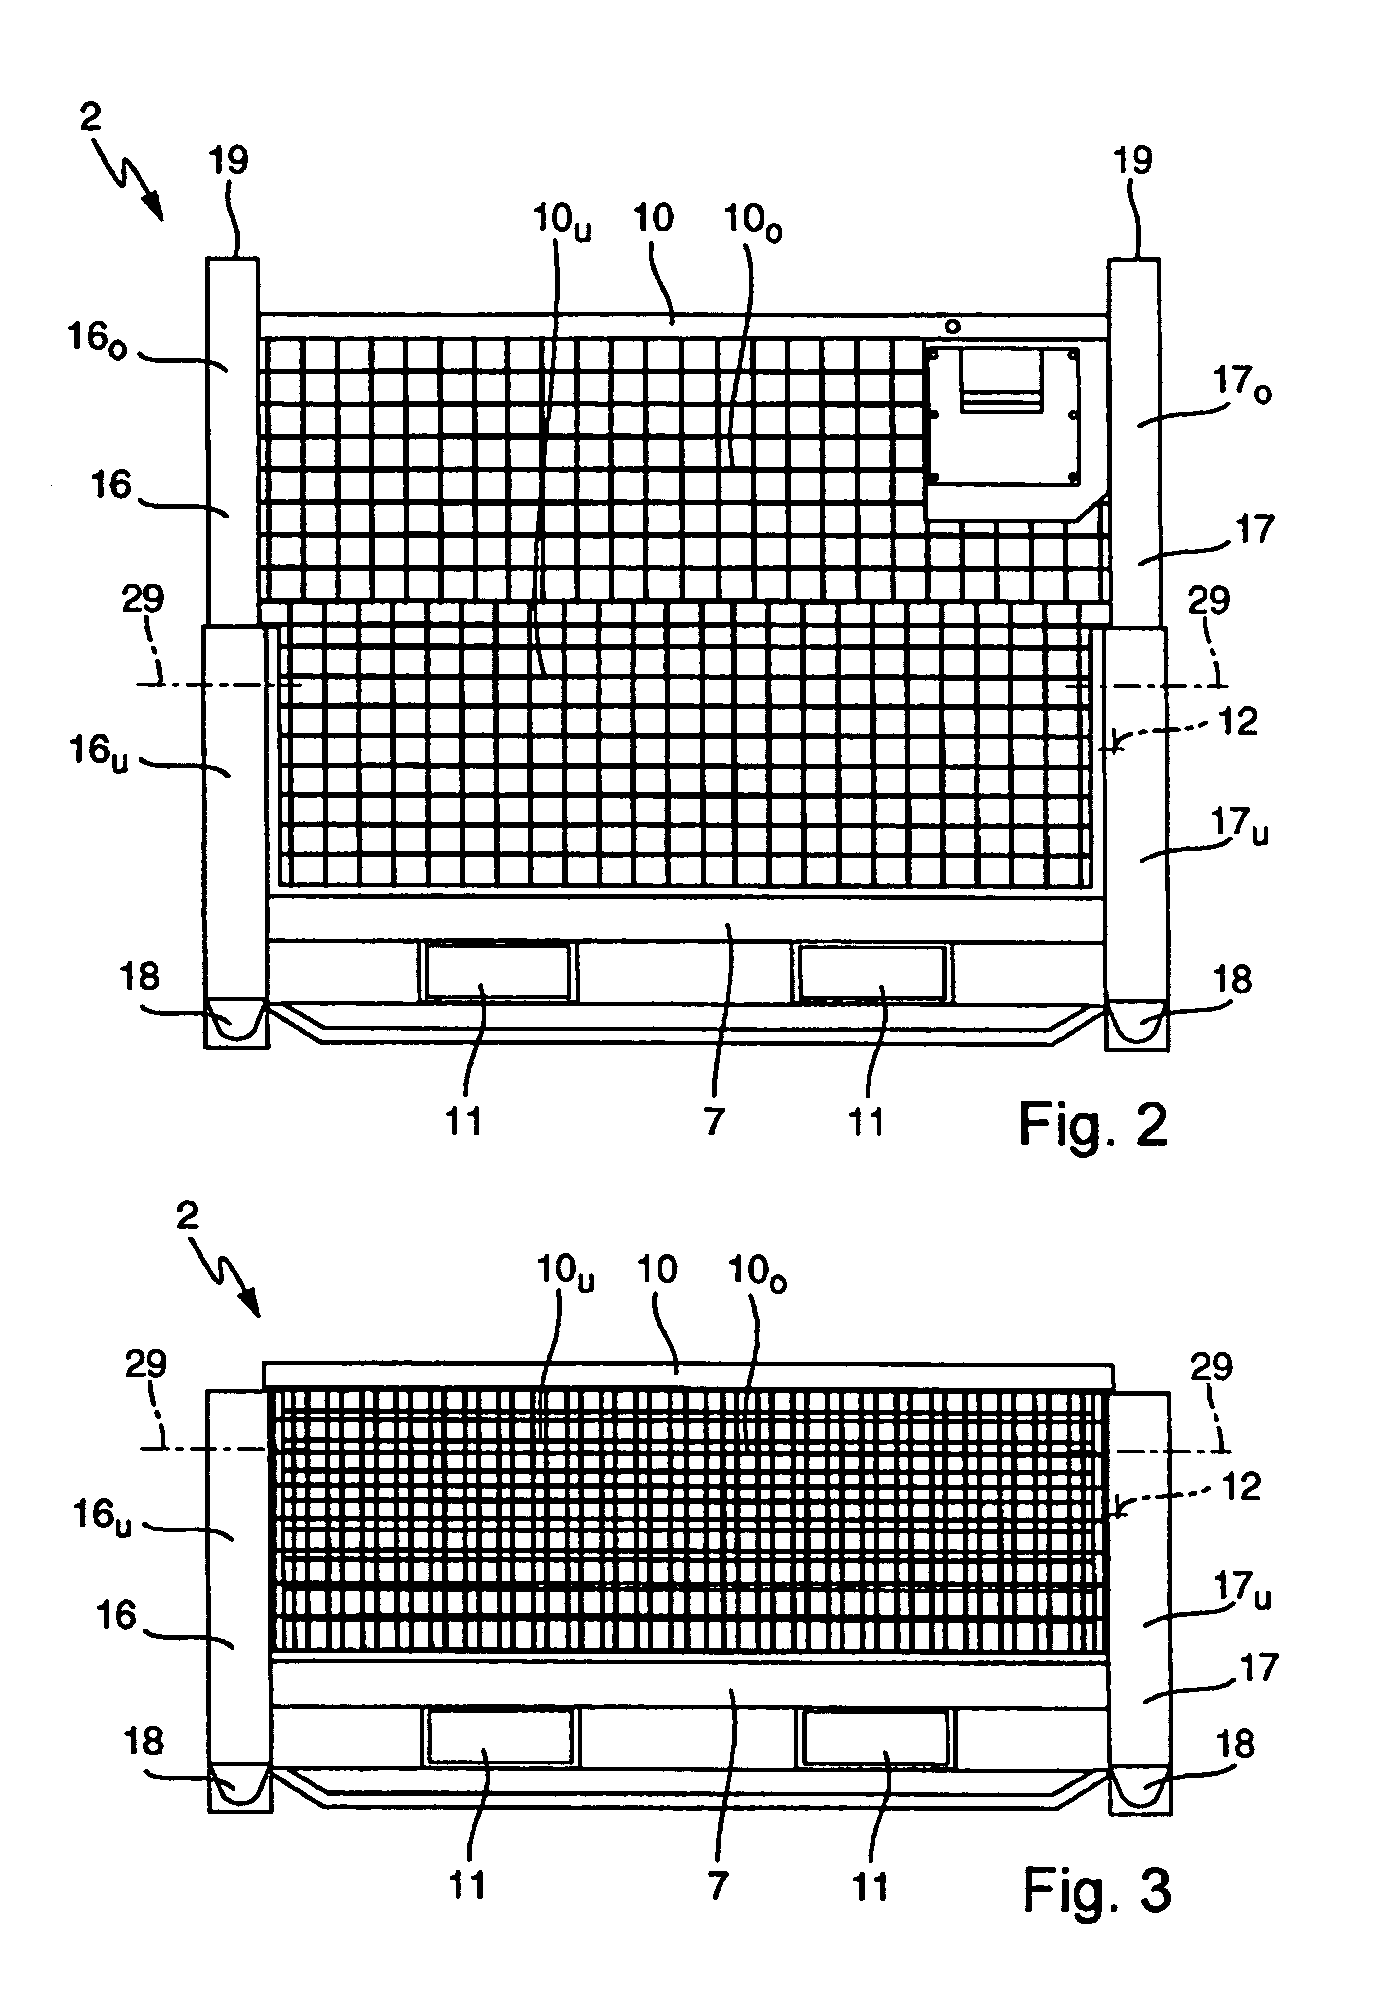 Shipping system